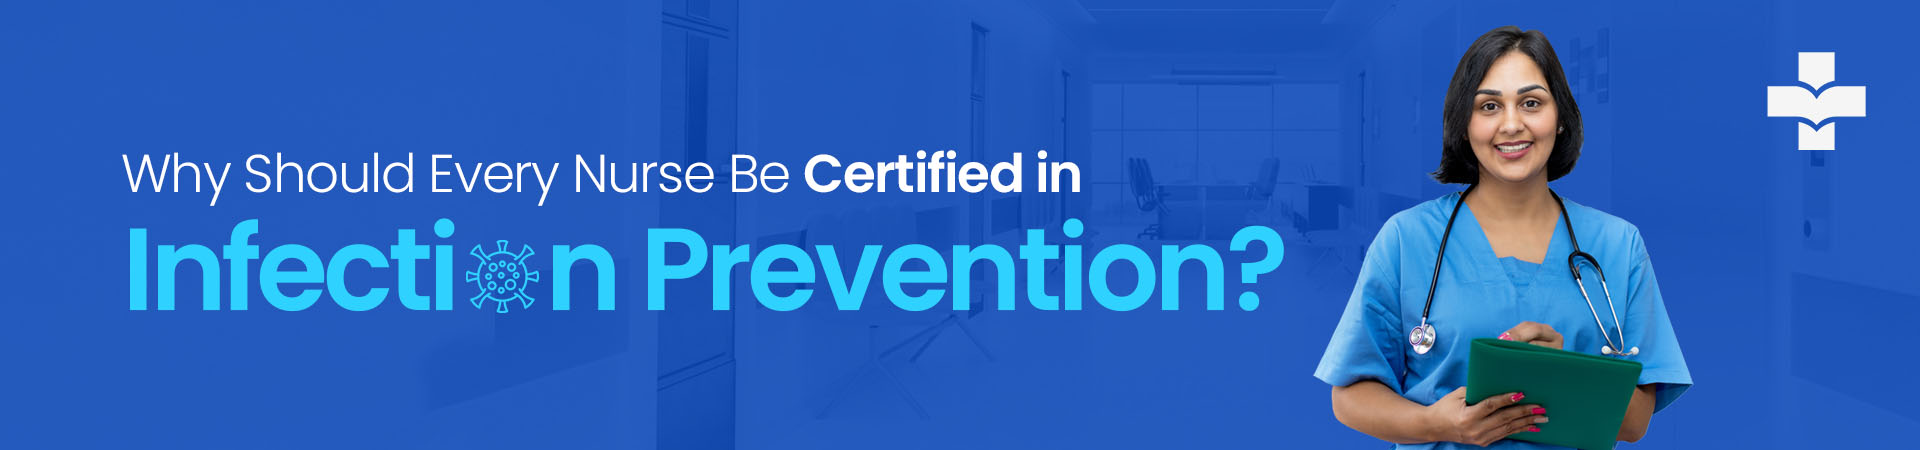 Certification Benefits for Nurses in Infection Prevention